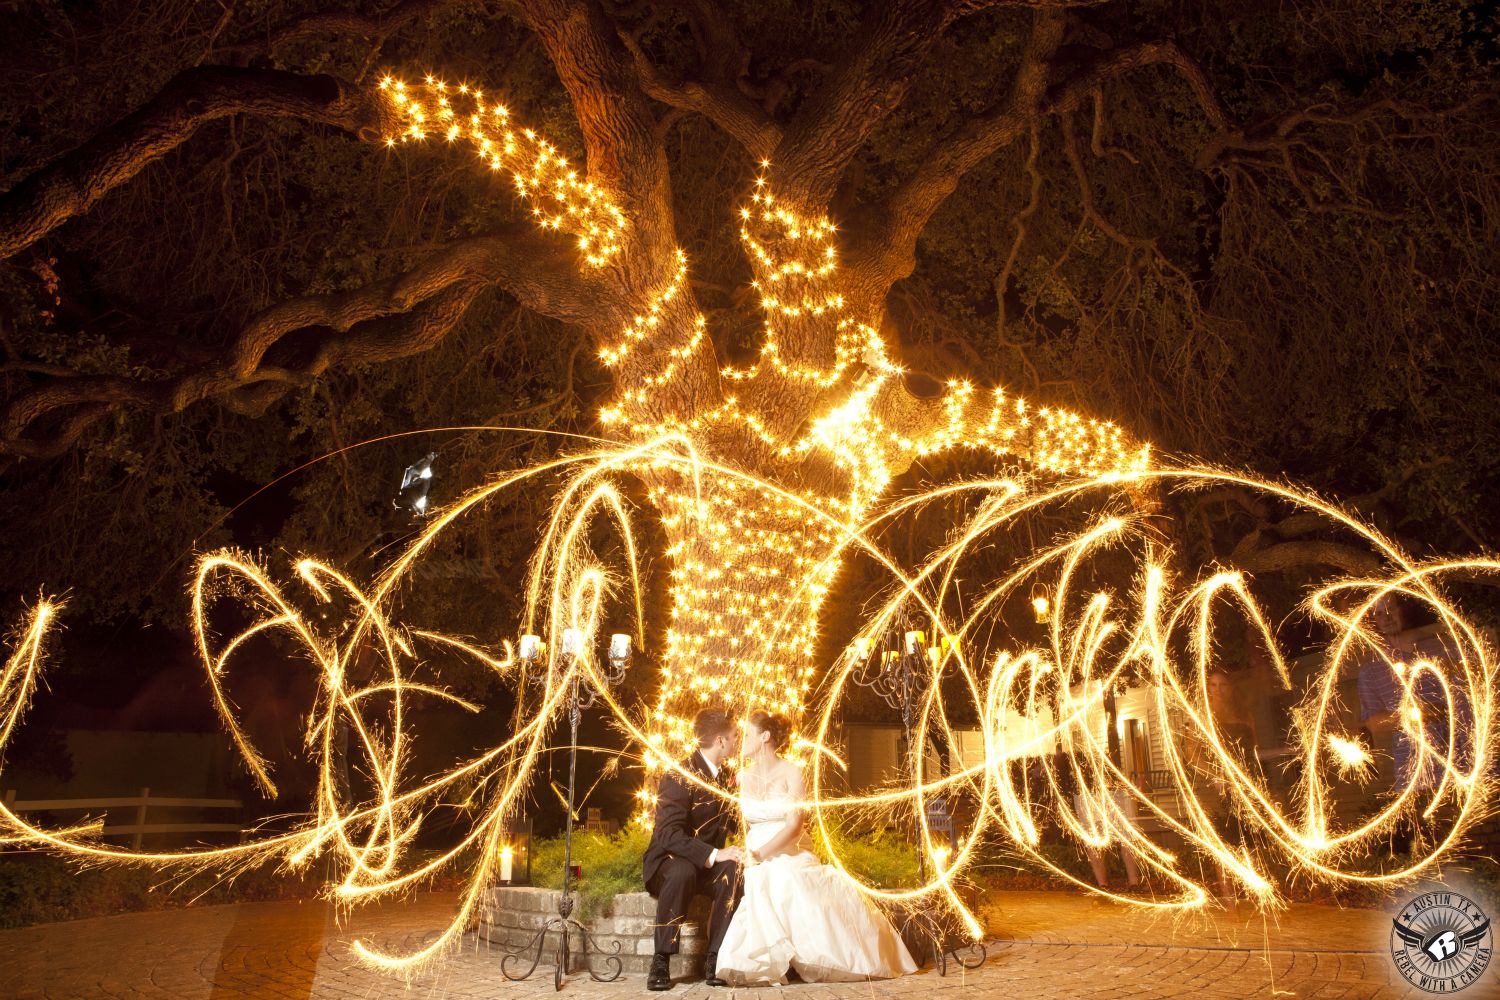 Bride and groom kiss at night during their wedding in front of oak tree with christimas lights and sparklers swirling around at Inn at Salado.